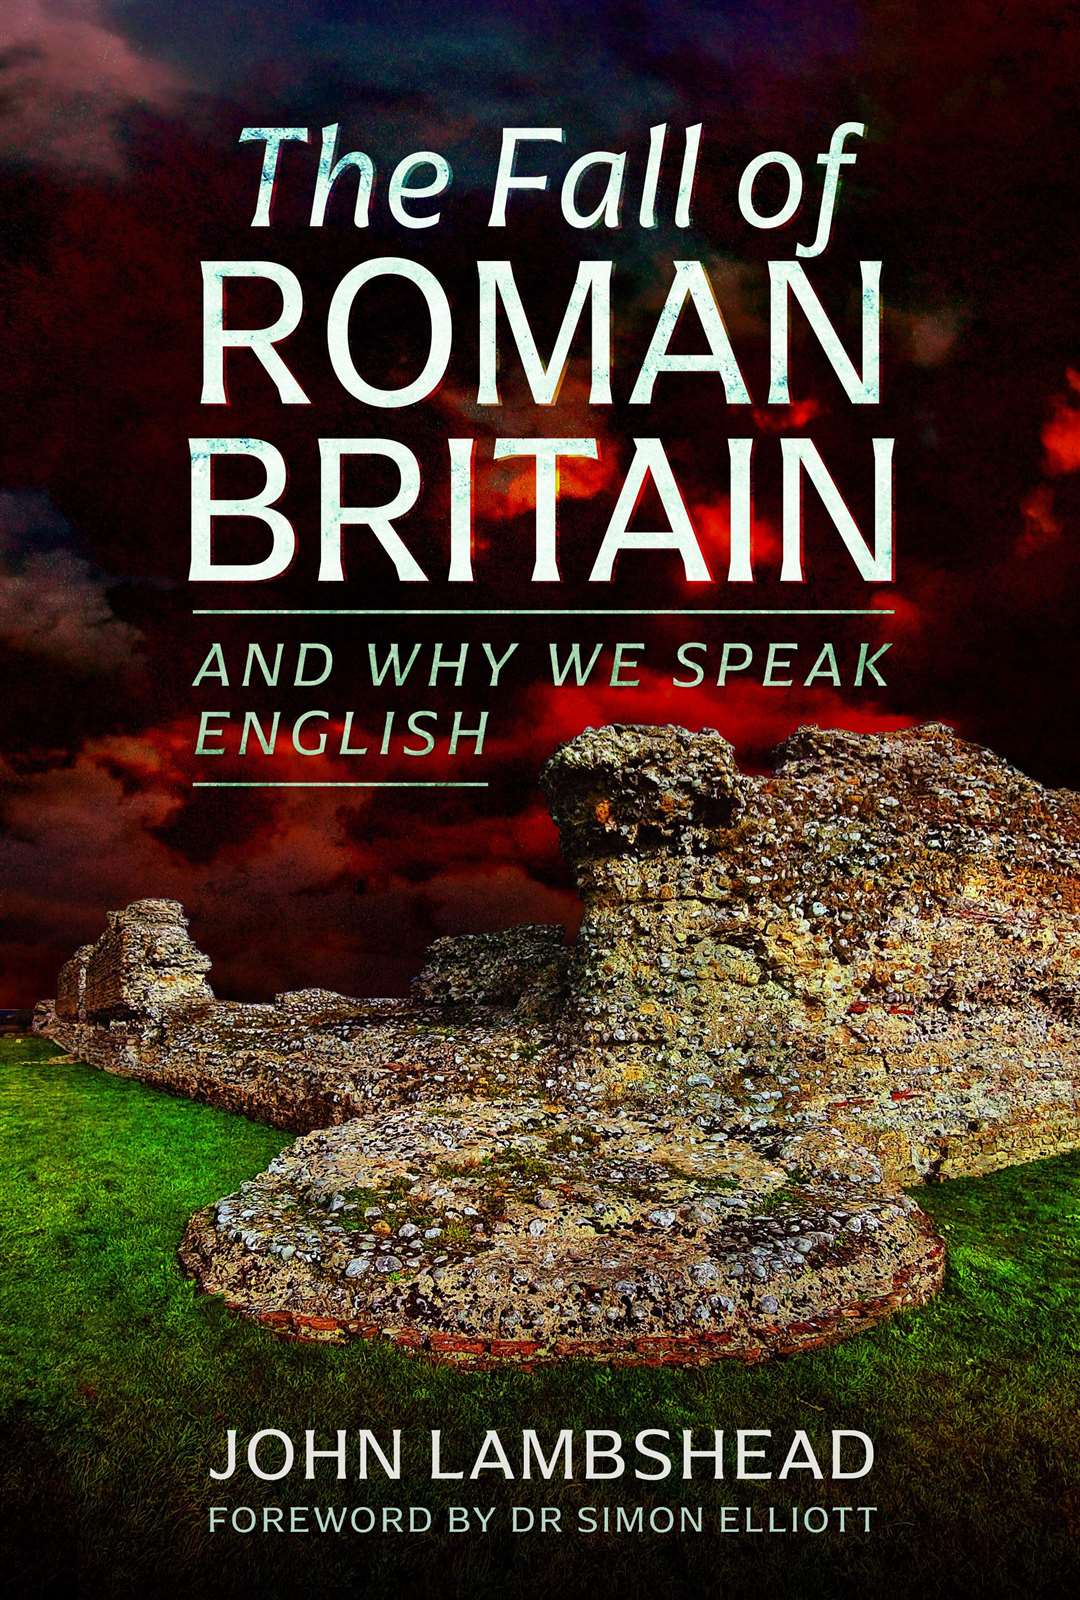 The Fall of Roman Britain, and Why We Speak English, by John Lambshead. Published by Pen & Sword Books